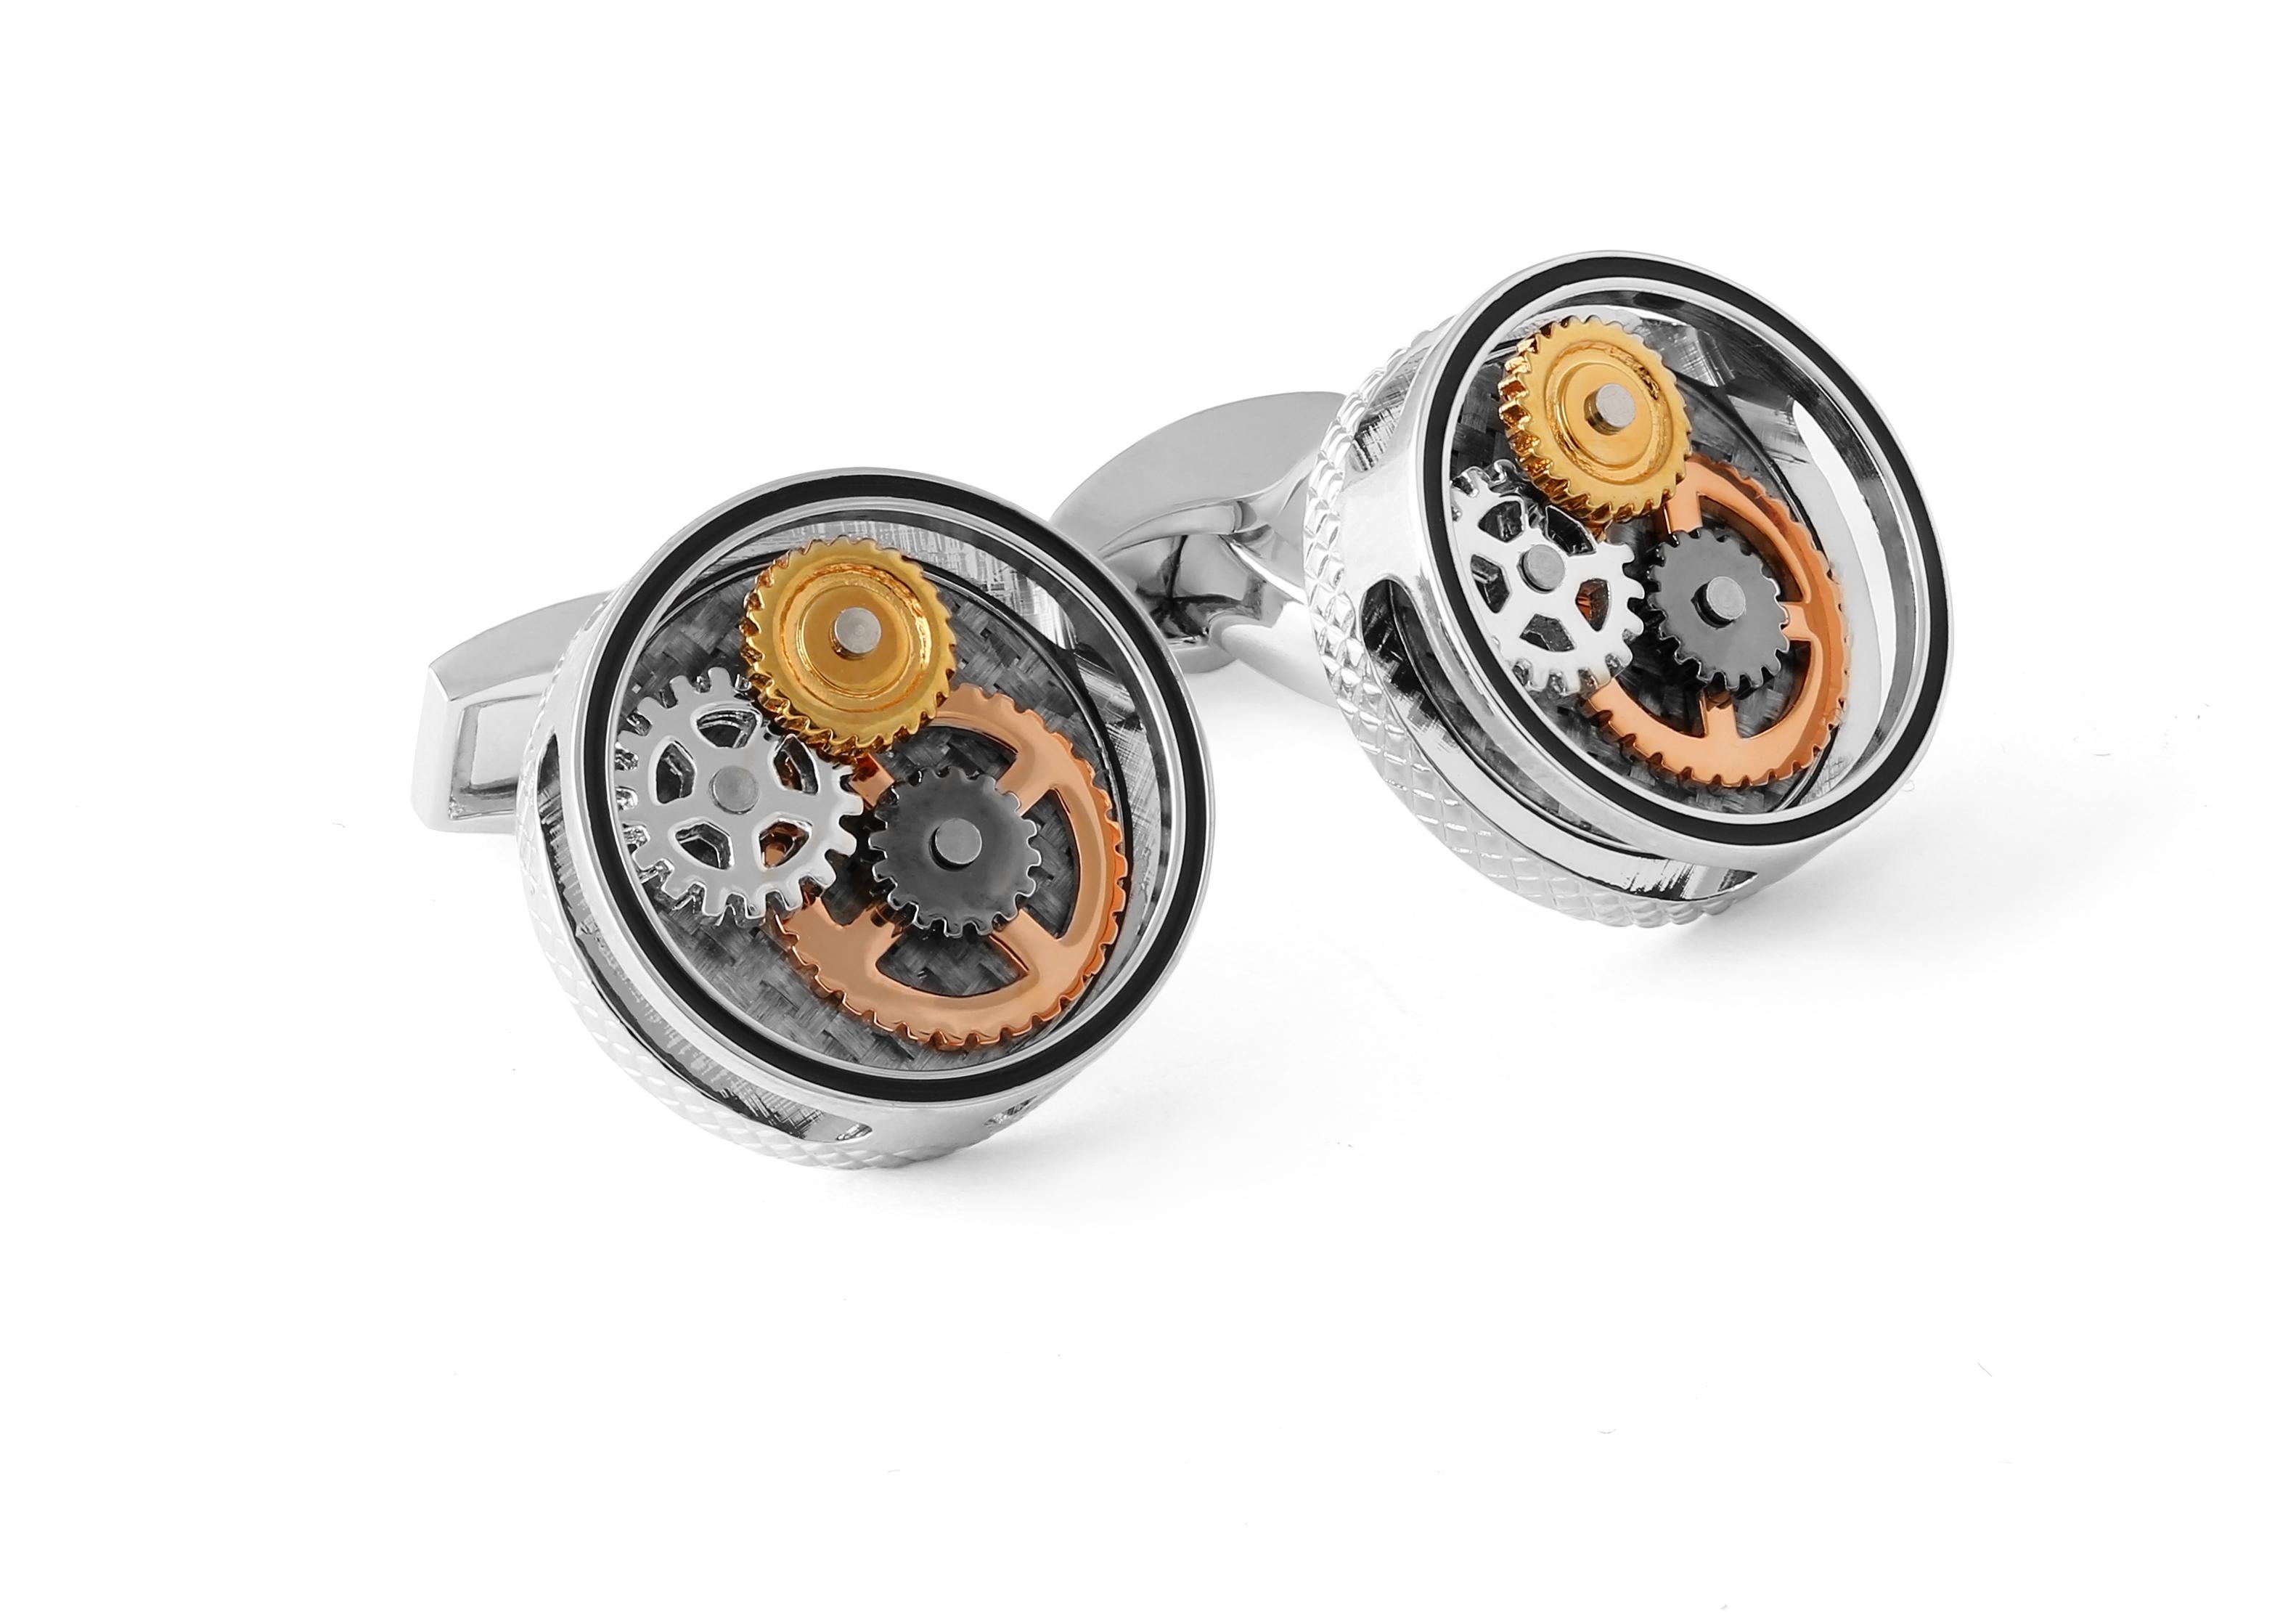 One of our bestsellers, a combination of coloured gears all rotate separately creating fun and movement - an evolution of the idea of motion and movement that is the Tateossian signature. Masculine circle frame cufflinks feature carbon fibre which